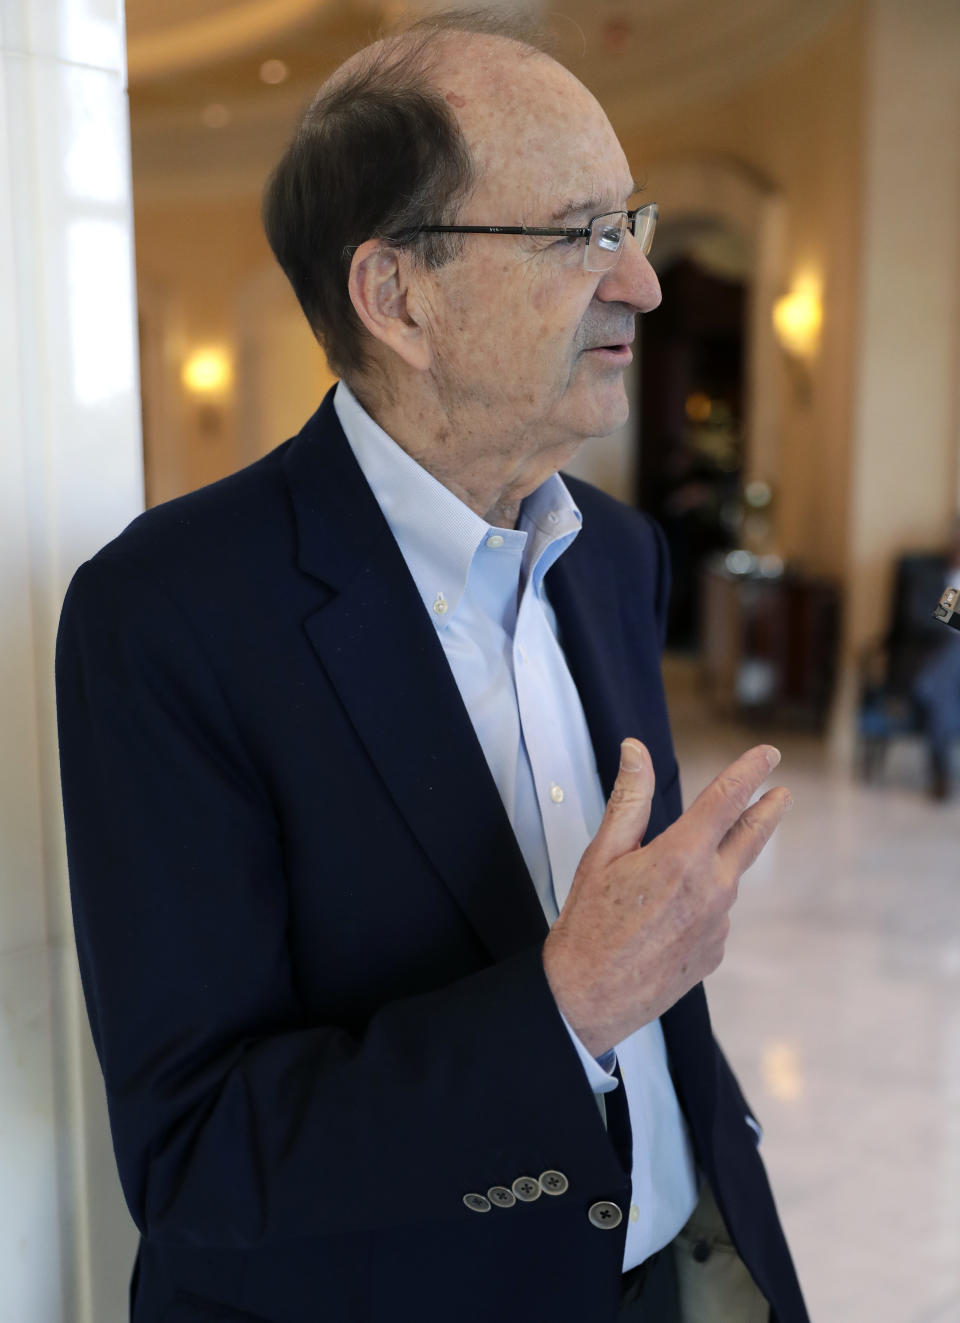 Bill DeWitt Jr., managing partner and chairman of the St. Louis Cardinals, speaks with a reporter at the baseball owners meetings Thursday, Feb. 7, 2019, in Orlando, Fla. (AP Photo/John Raoux)